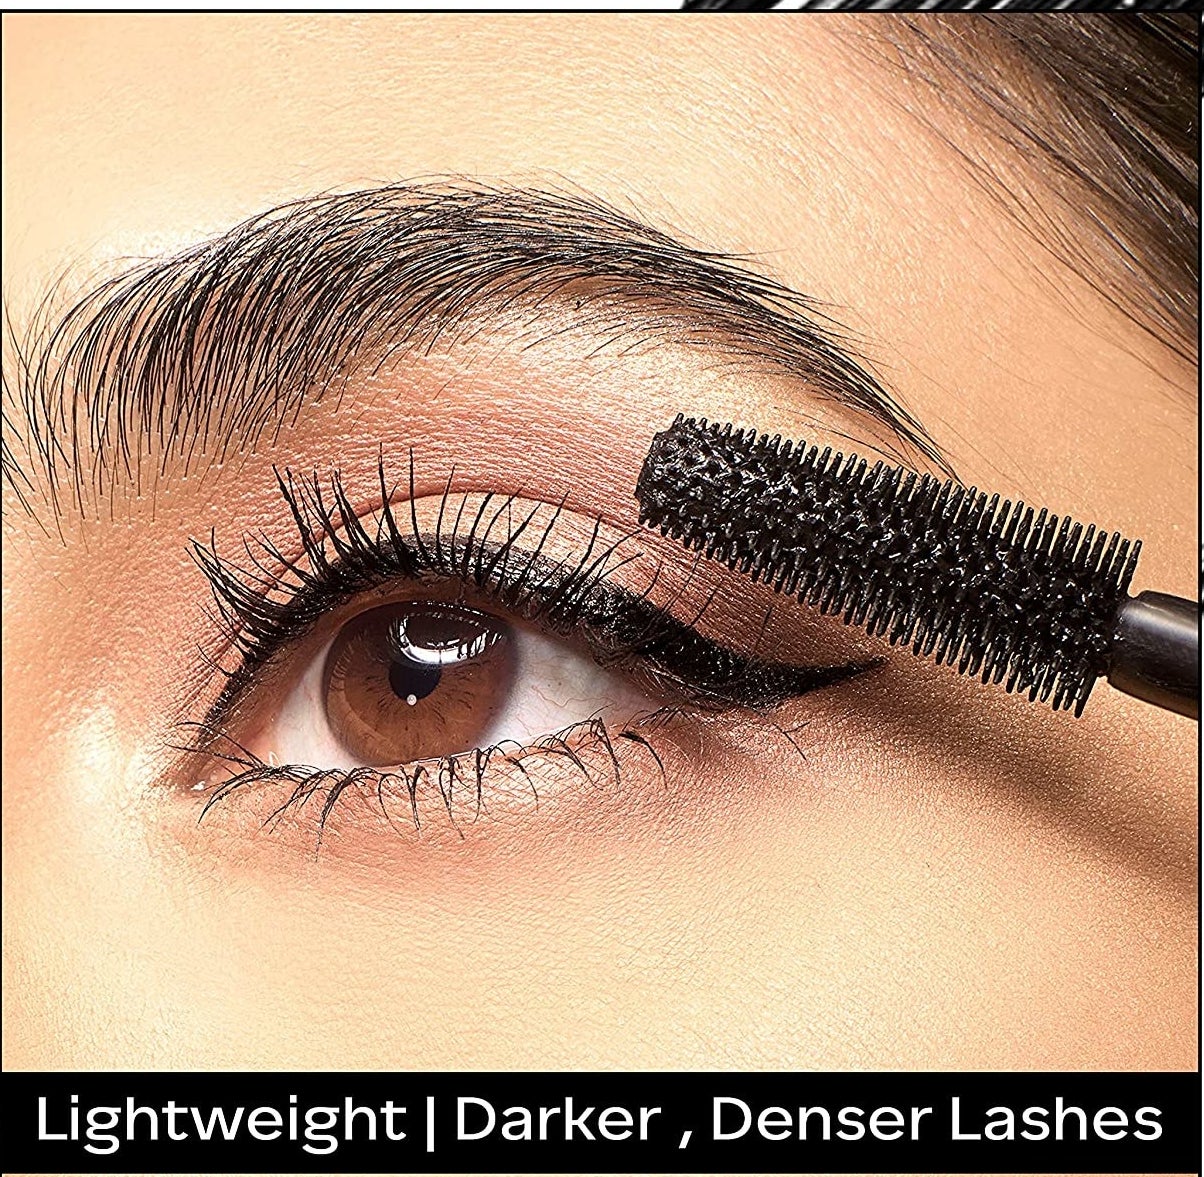 A person putting mascara on their lashes